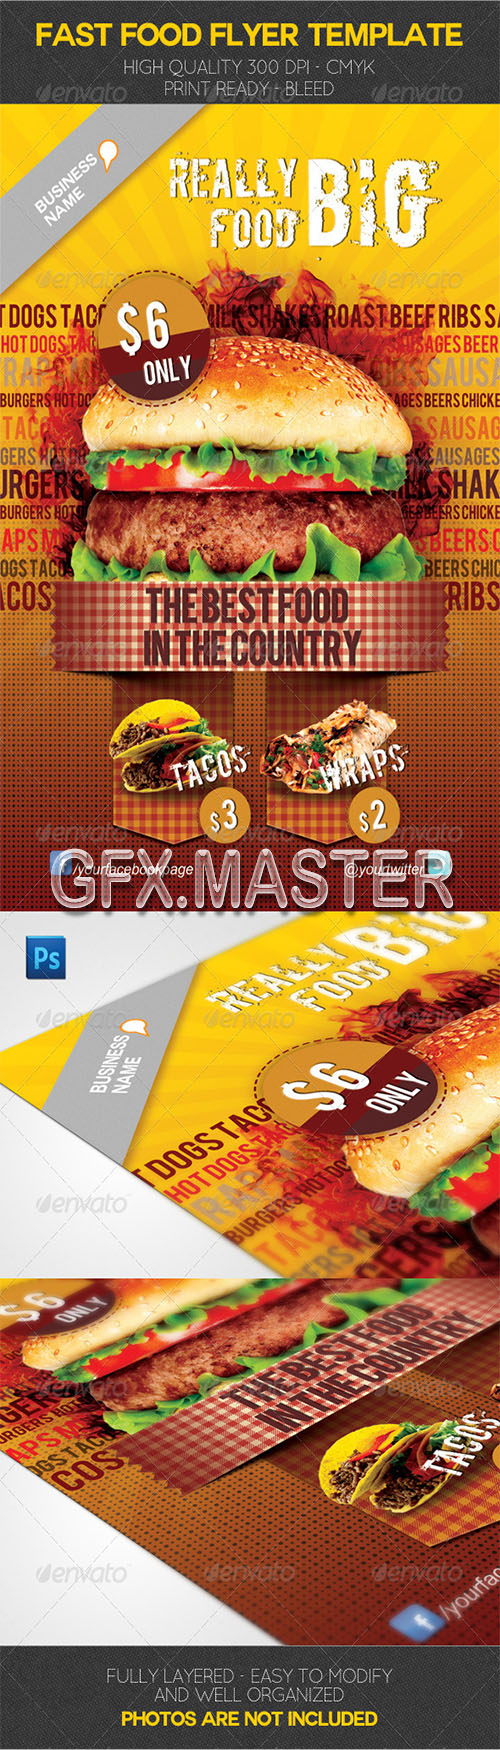 GraphicRiver - Fast Food Flyer Template